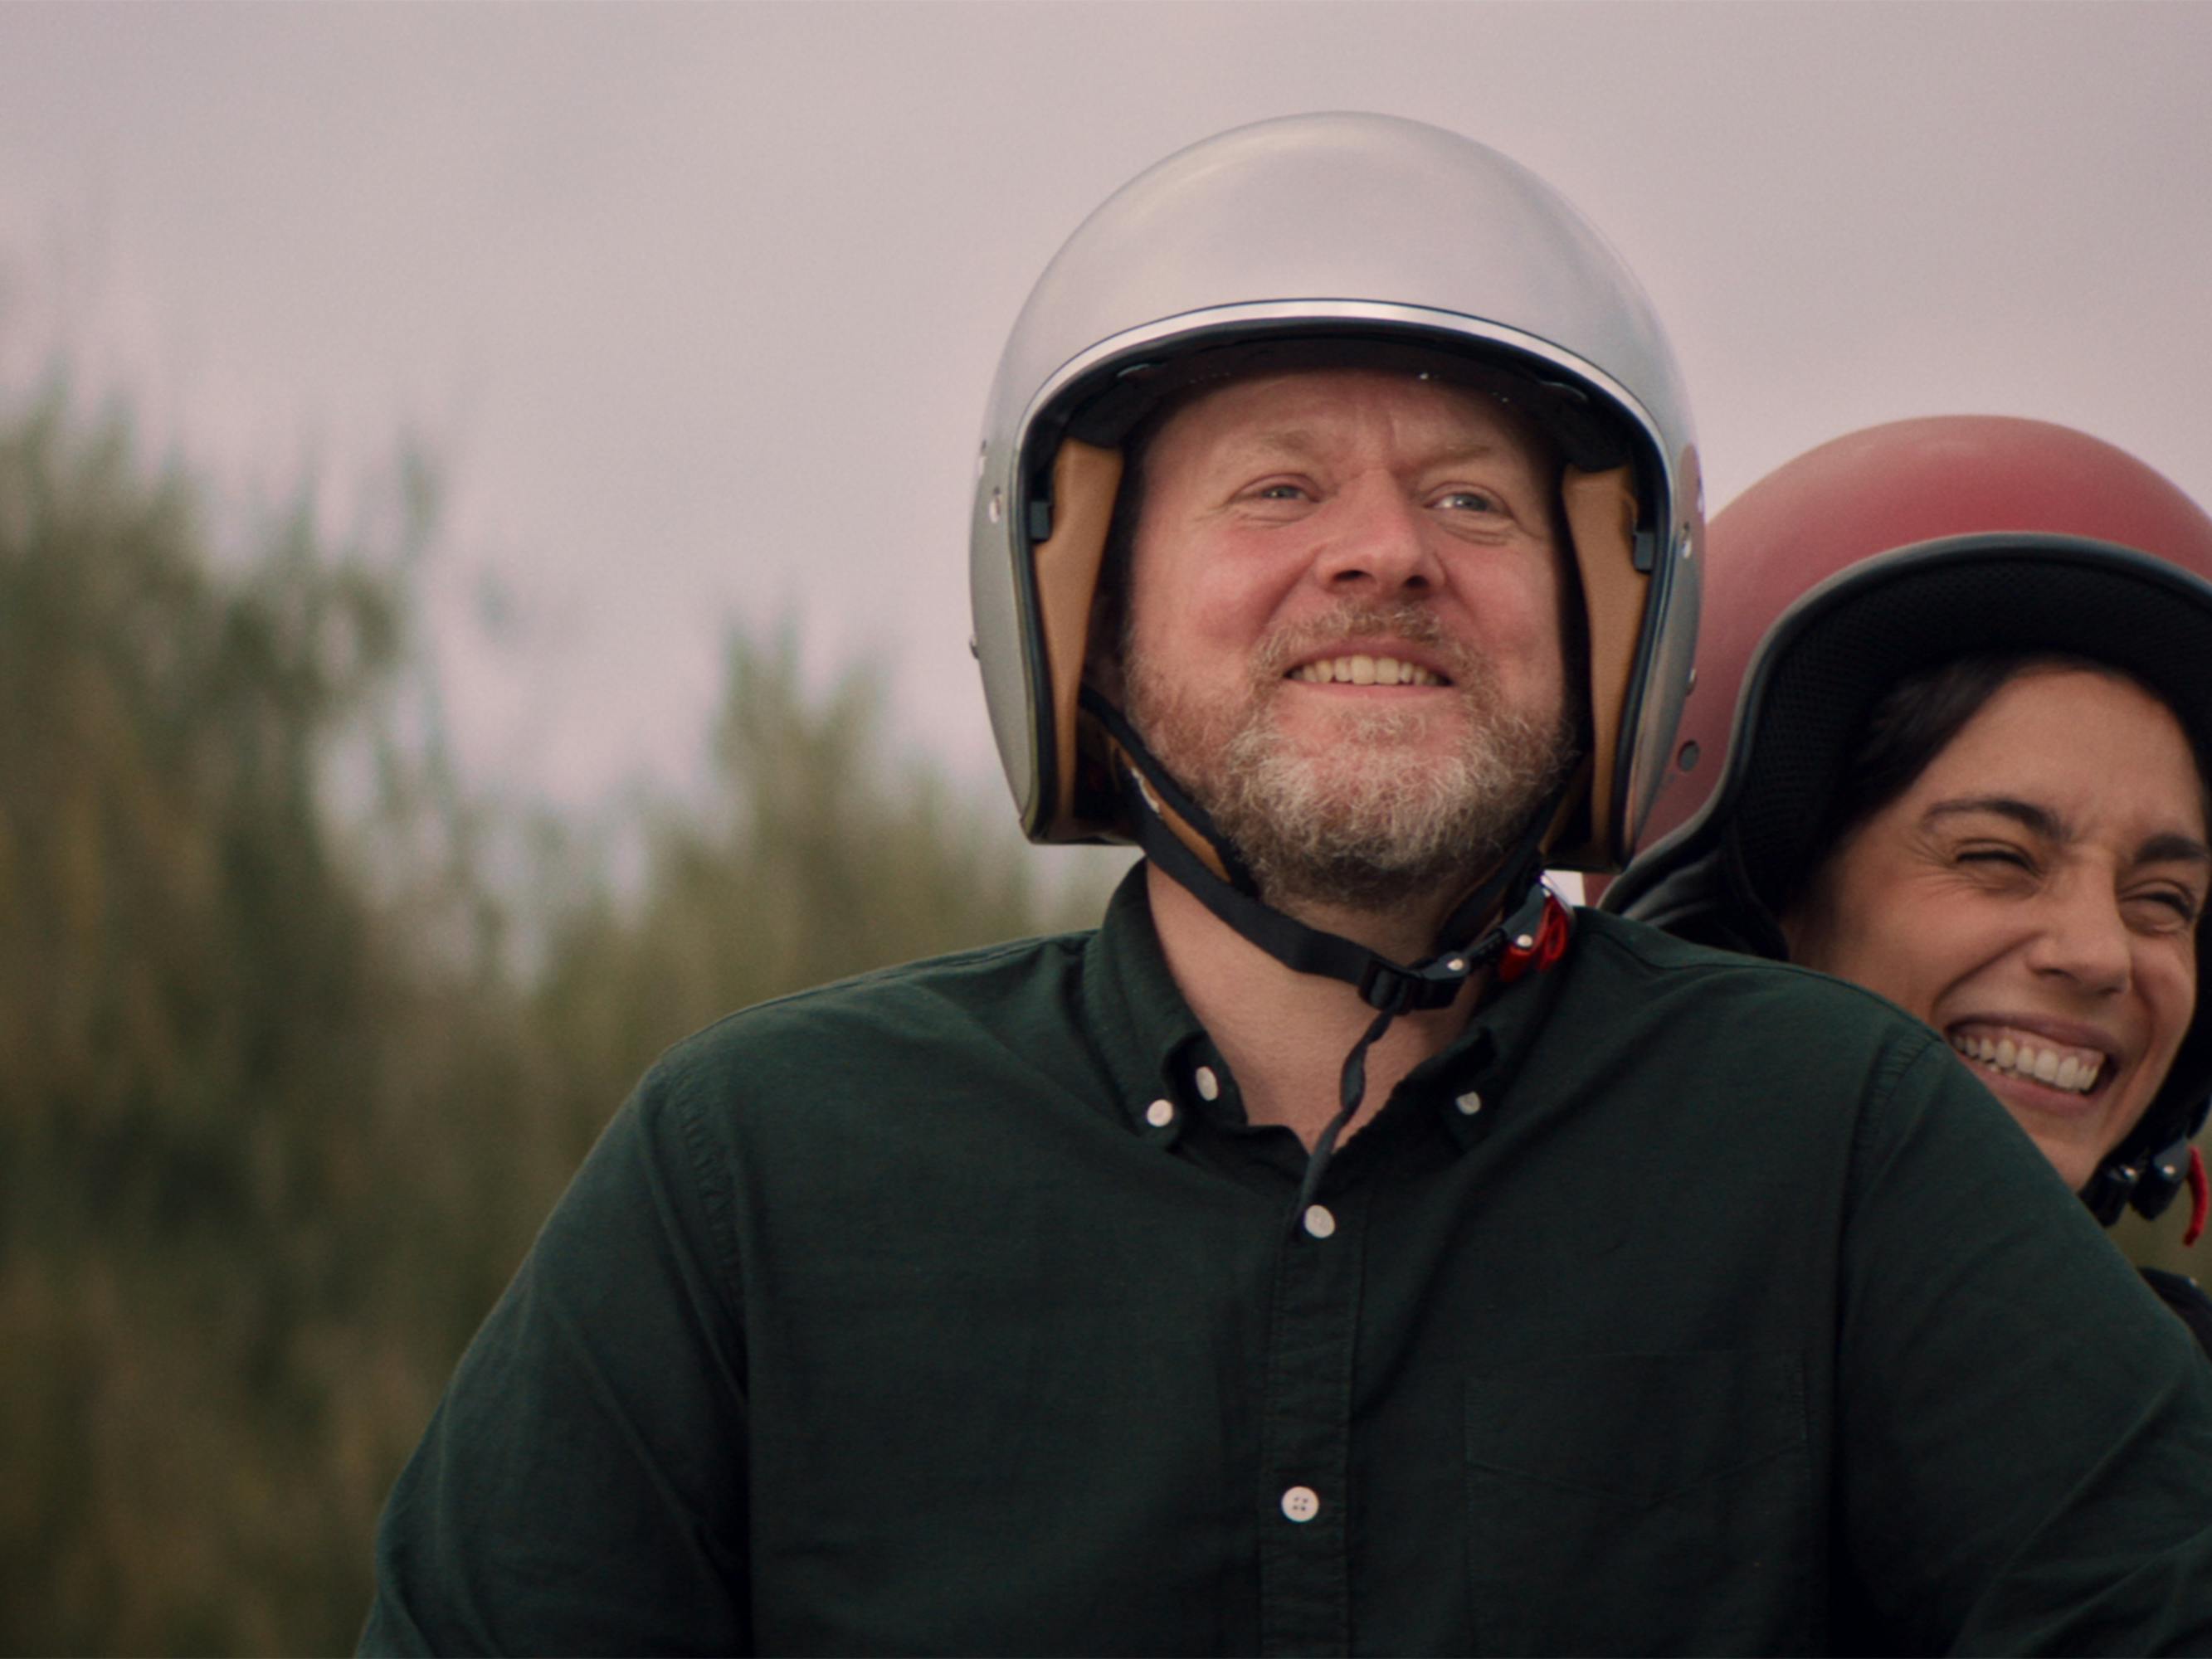 Theo (Anders Matthesen) and Sophia (Cristiana Dell’Anna) ride on a motorcycle wearing white and red helmets respectively, looking elated. 